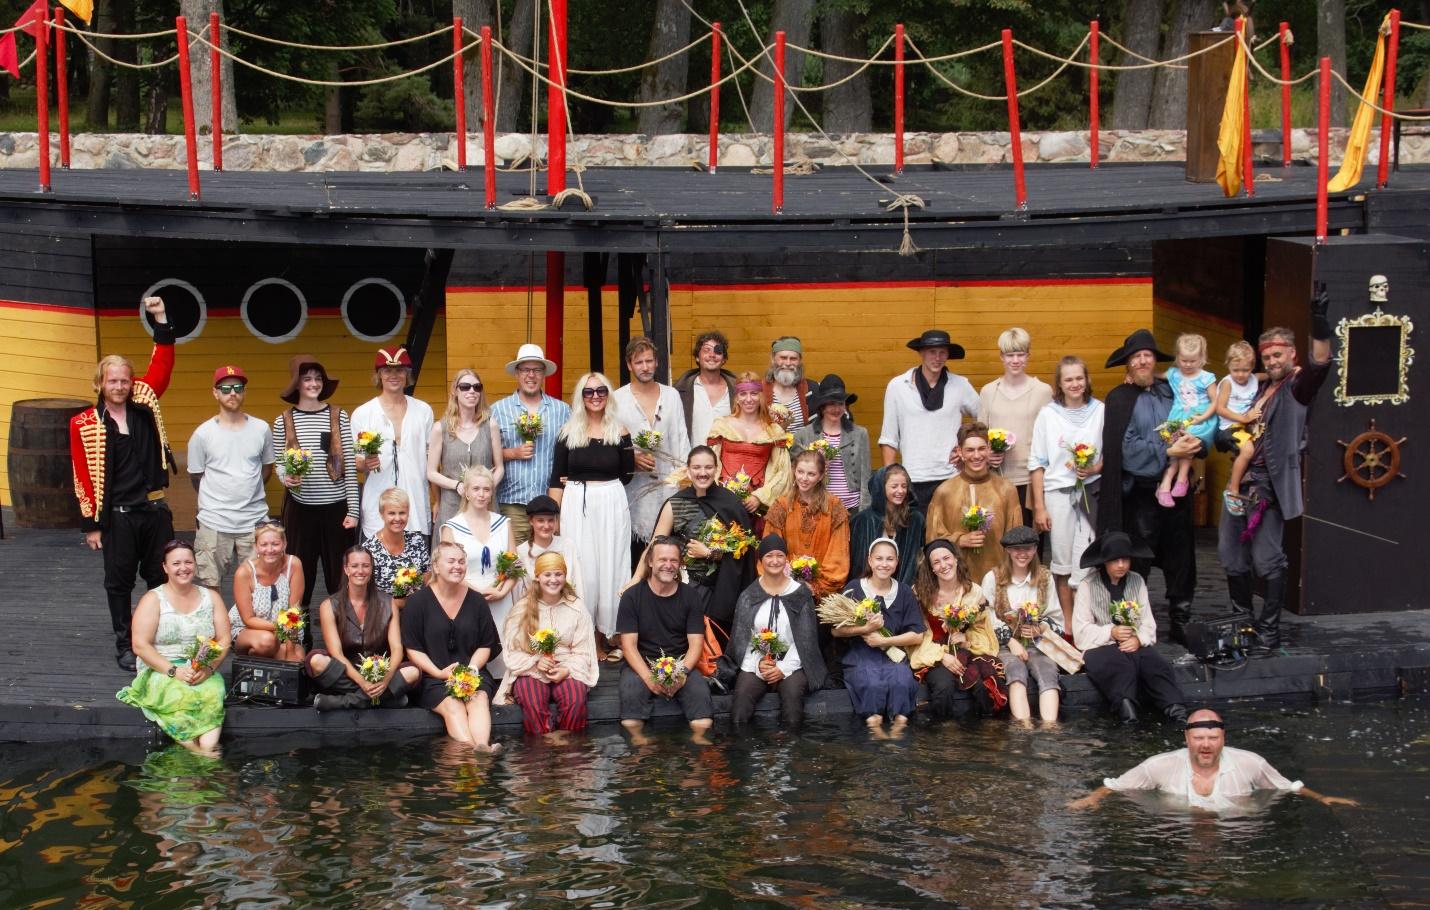 A group of people posing for a photo in a body of waterDescription automatically generated with medium confidence